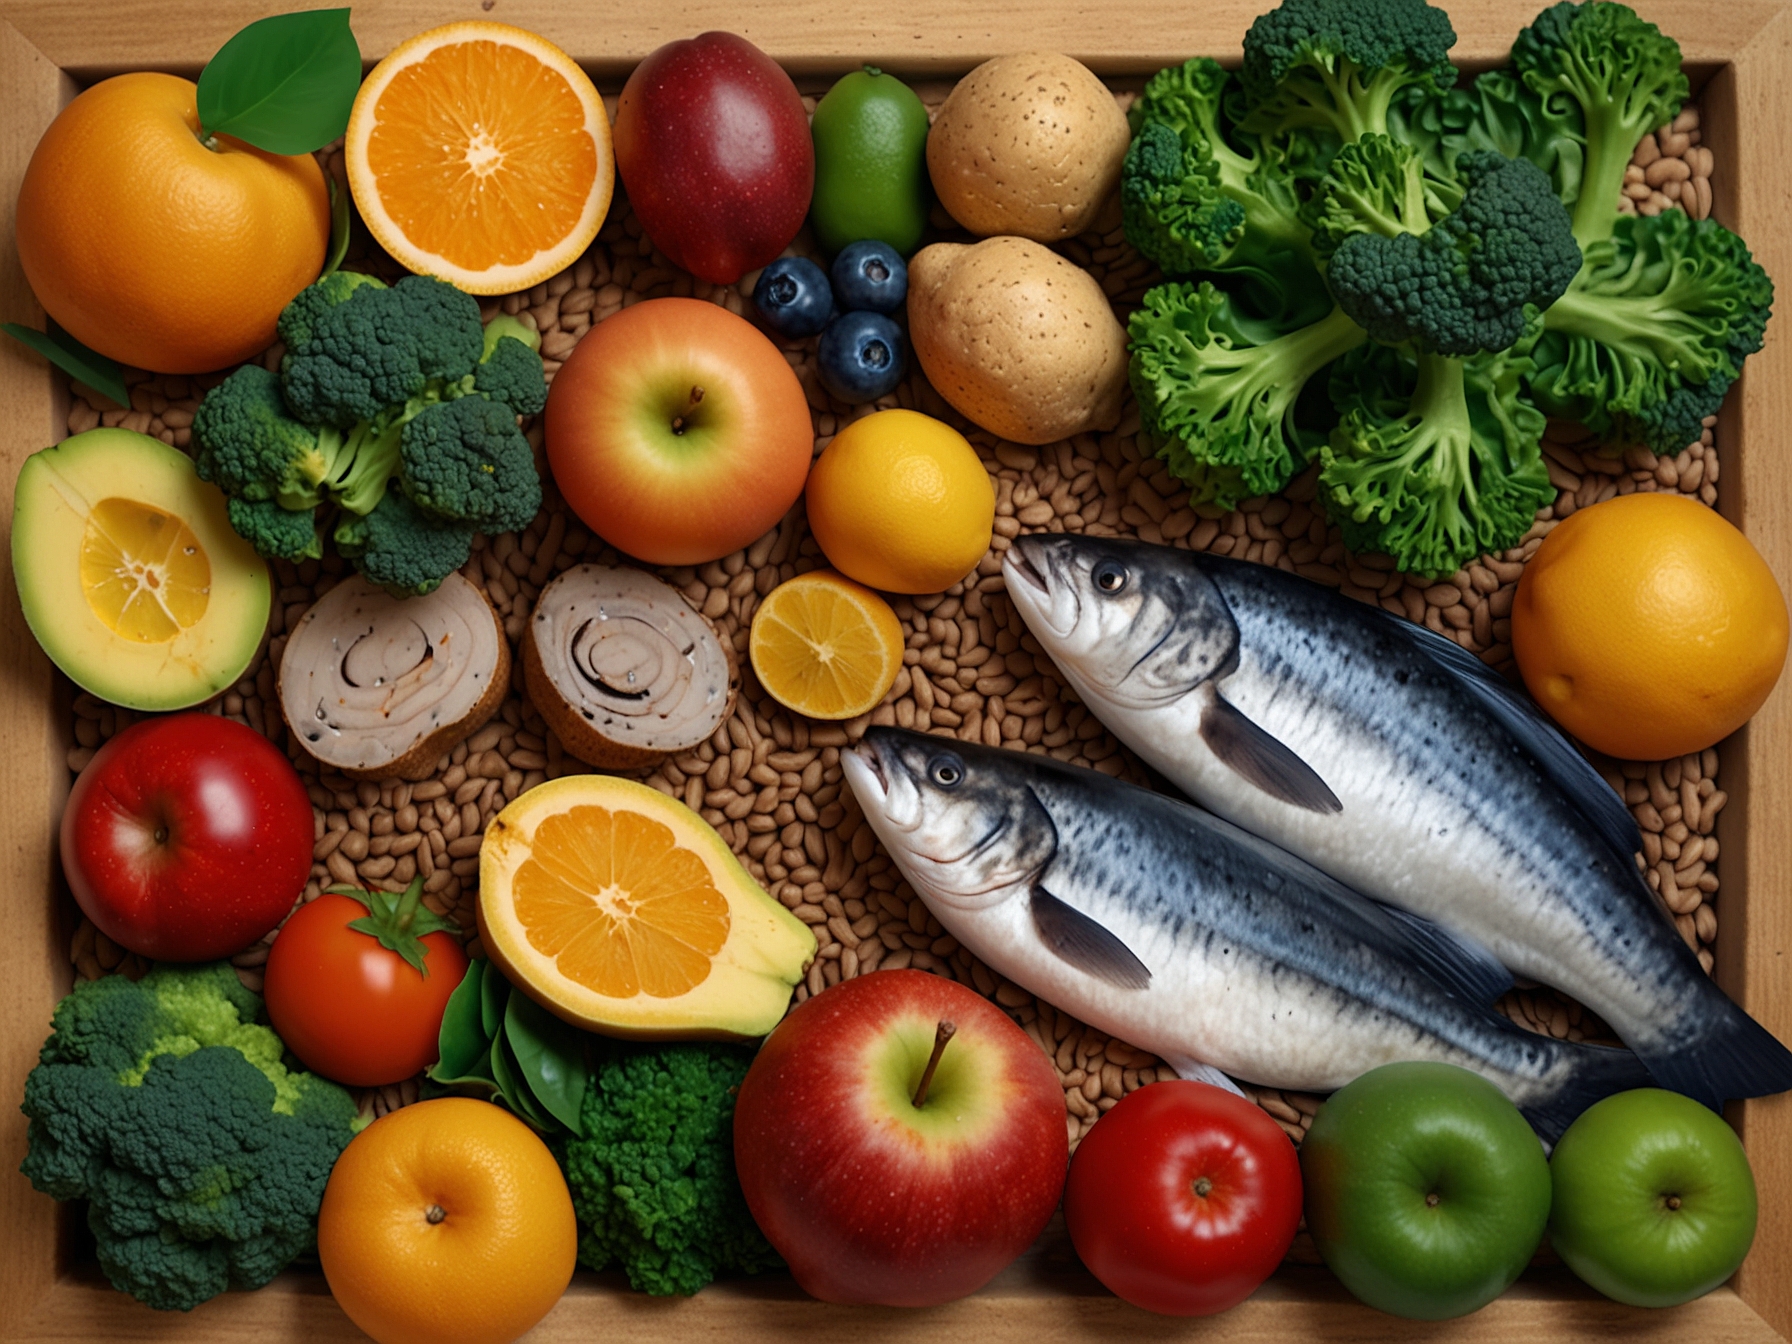 A healthy meal consisting of fruits, vegetables, whole grains, and fish. The image underscores the importance of a balanced diet rich in omega-3 fatty acids and plant-based foods for maintaining heart and brain health.